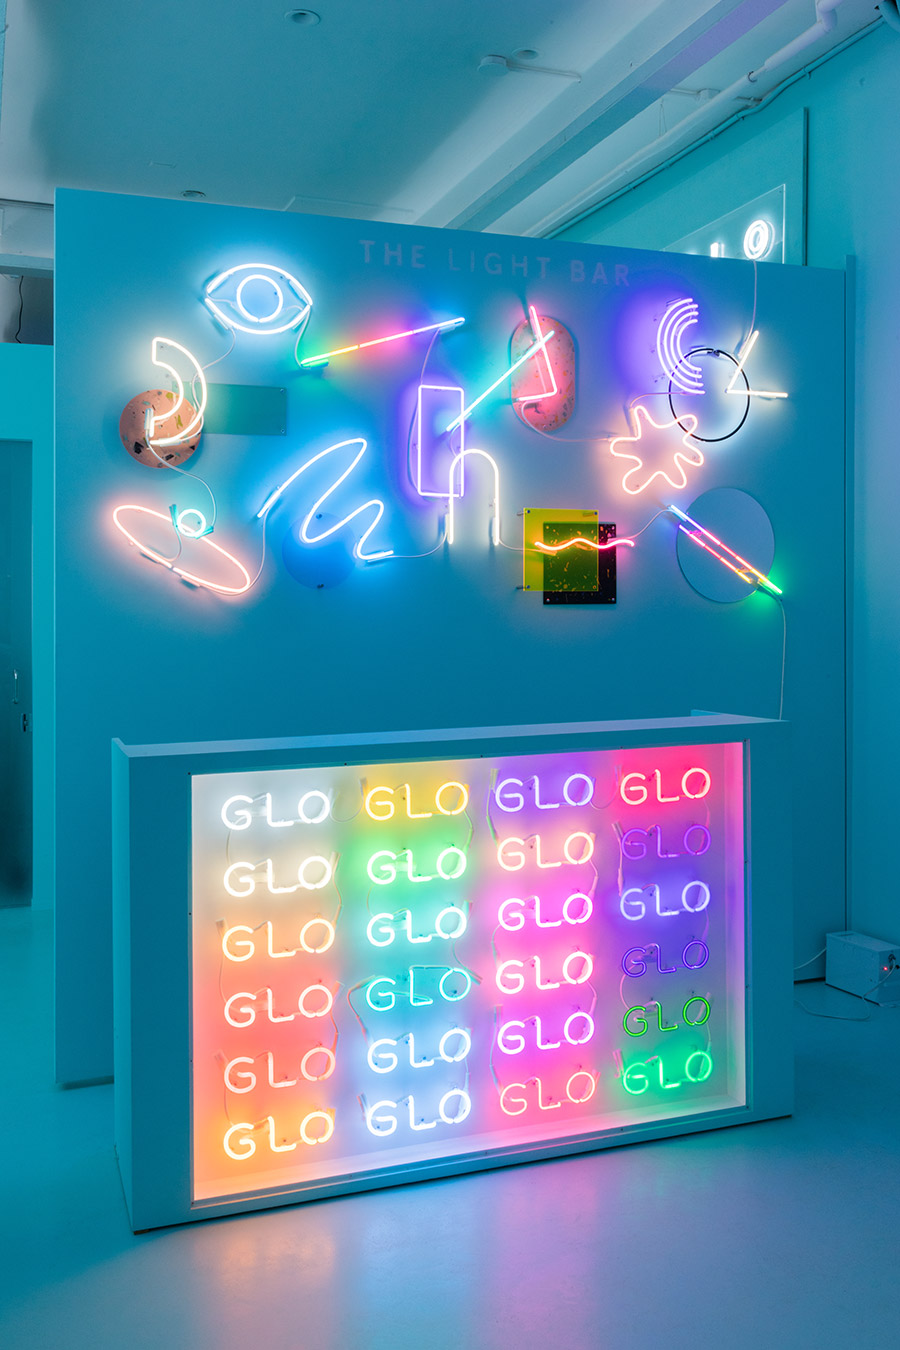 Gen Y-favorite Name Glo puts down roots in New York - AN ...